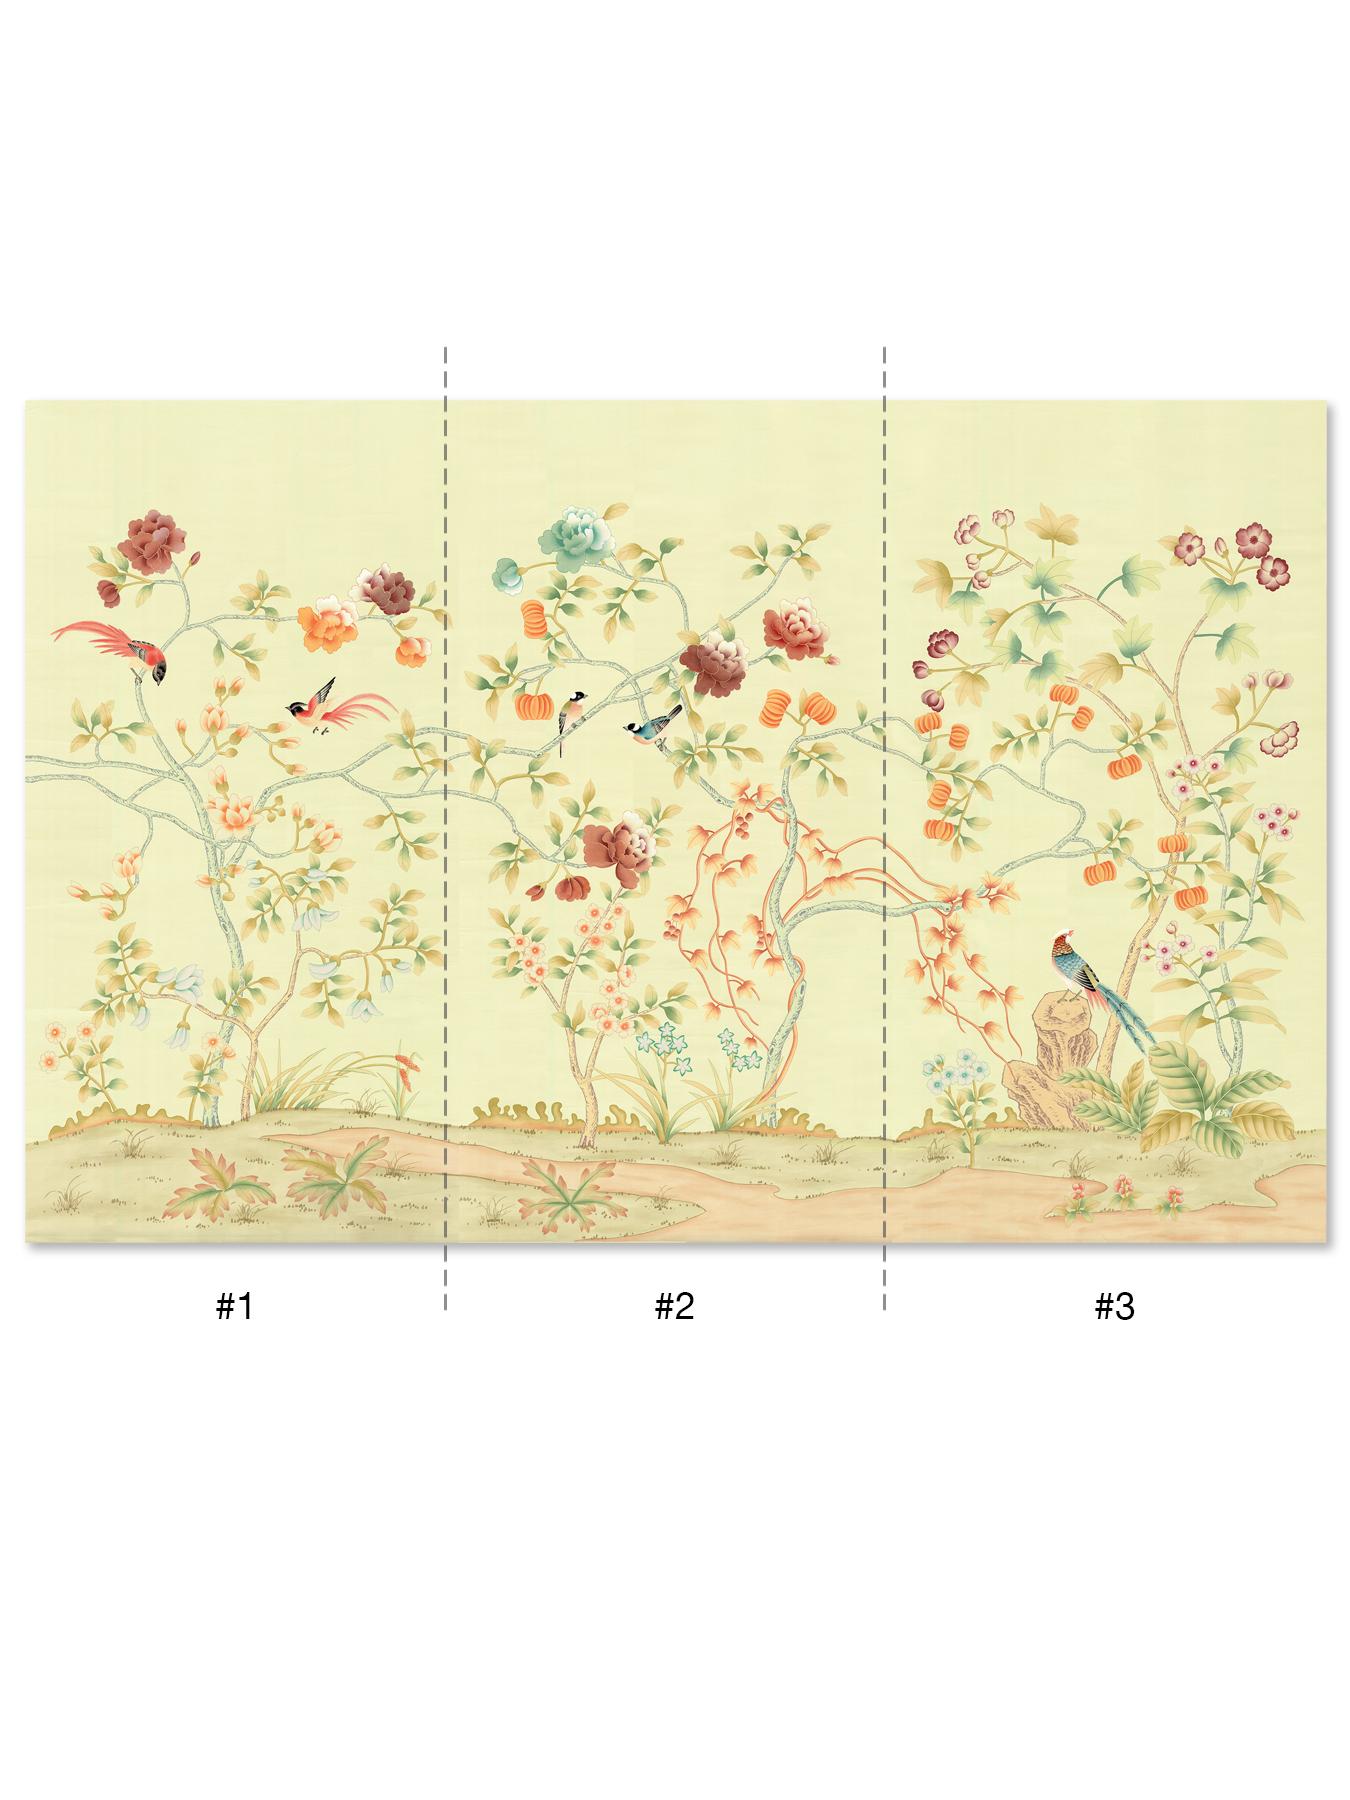 Ashford Garden is a chinoiserie mural with robust flowers and elegant tree branches populated by a mix of song birds. The mural consist of three panels made of paper-backed silk. Each panel is 3 feet wide with the top of the design reaching 5 feet